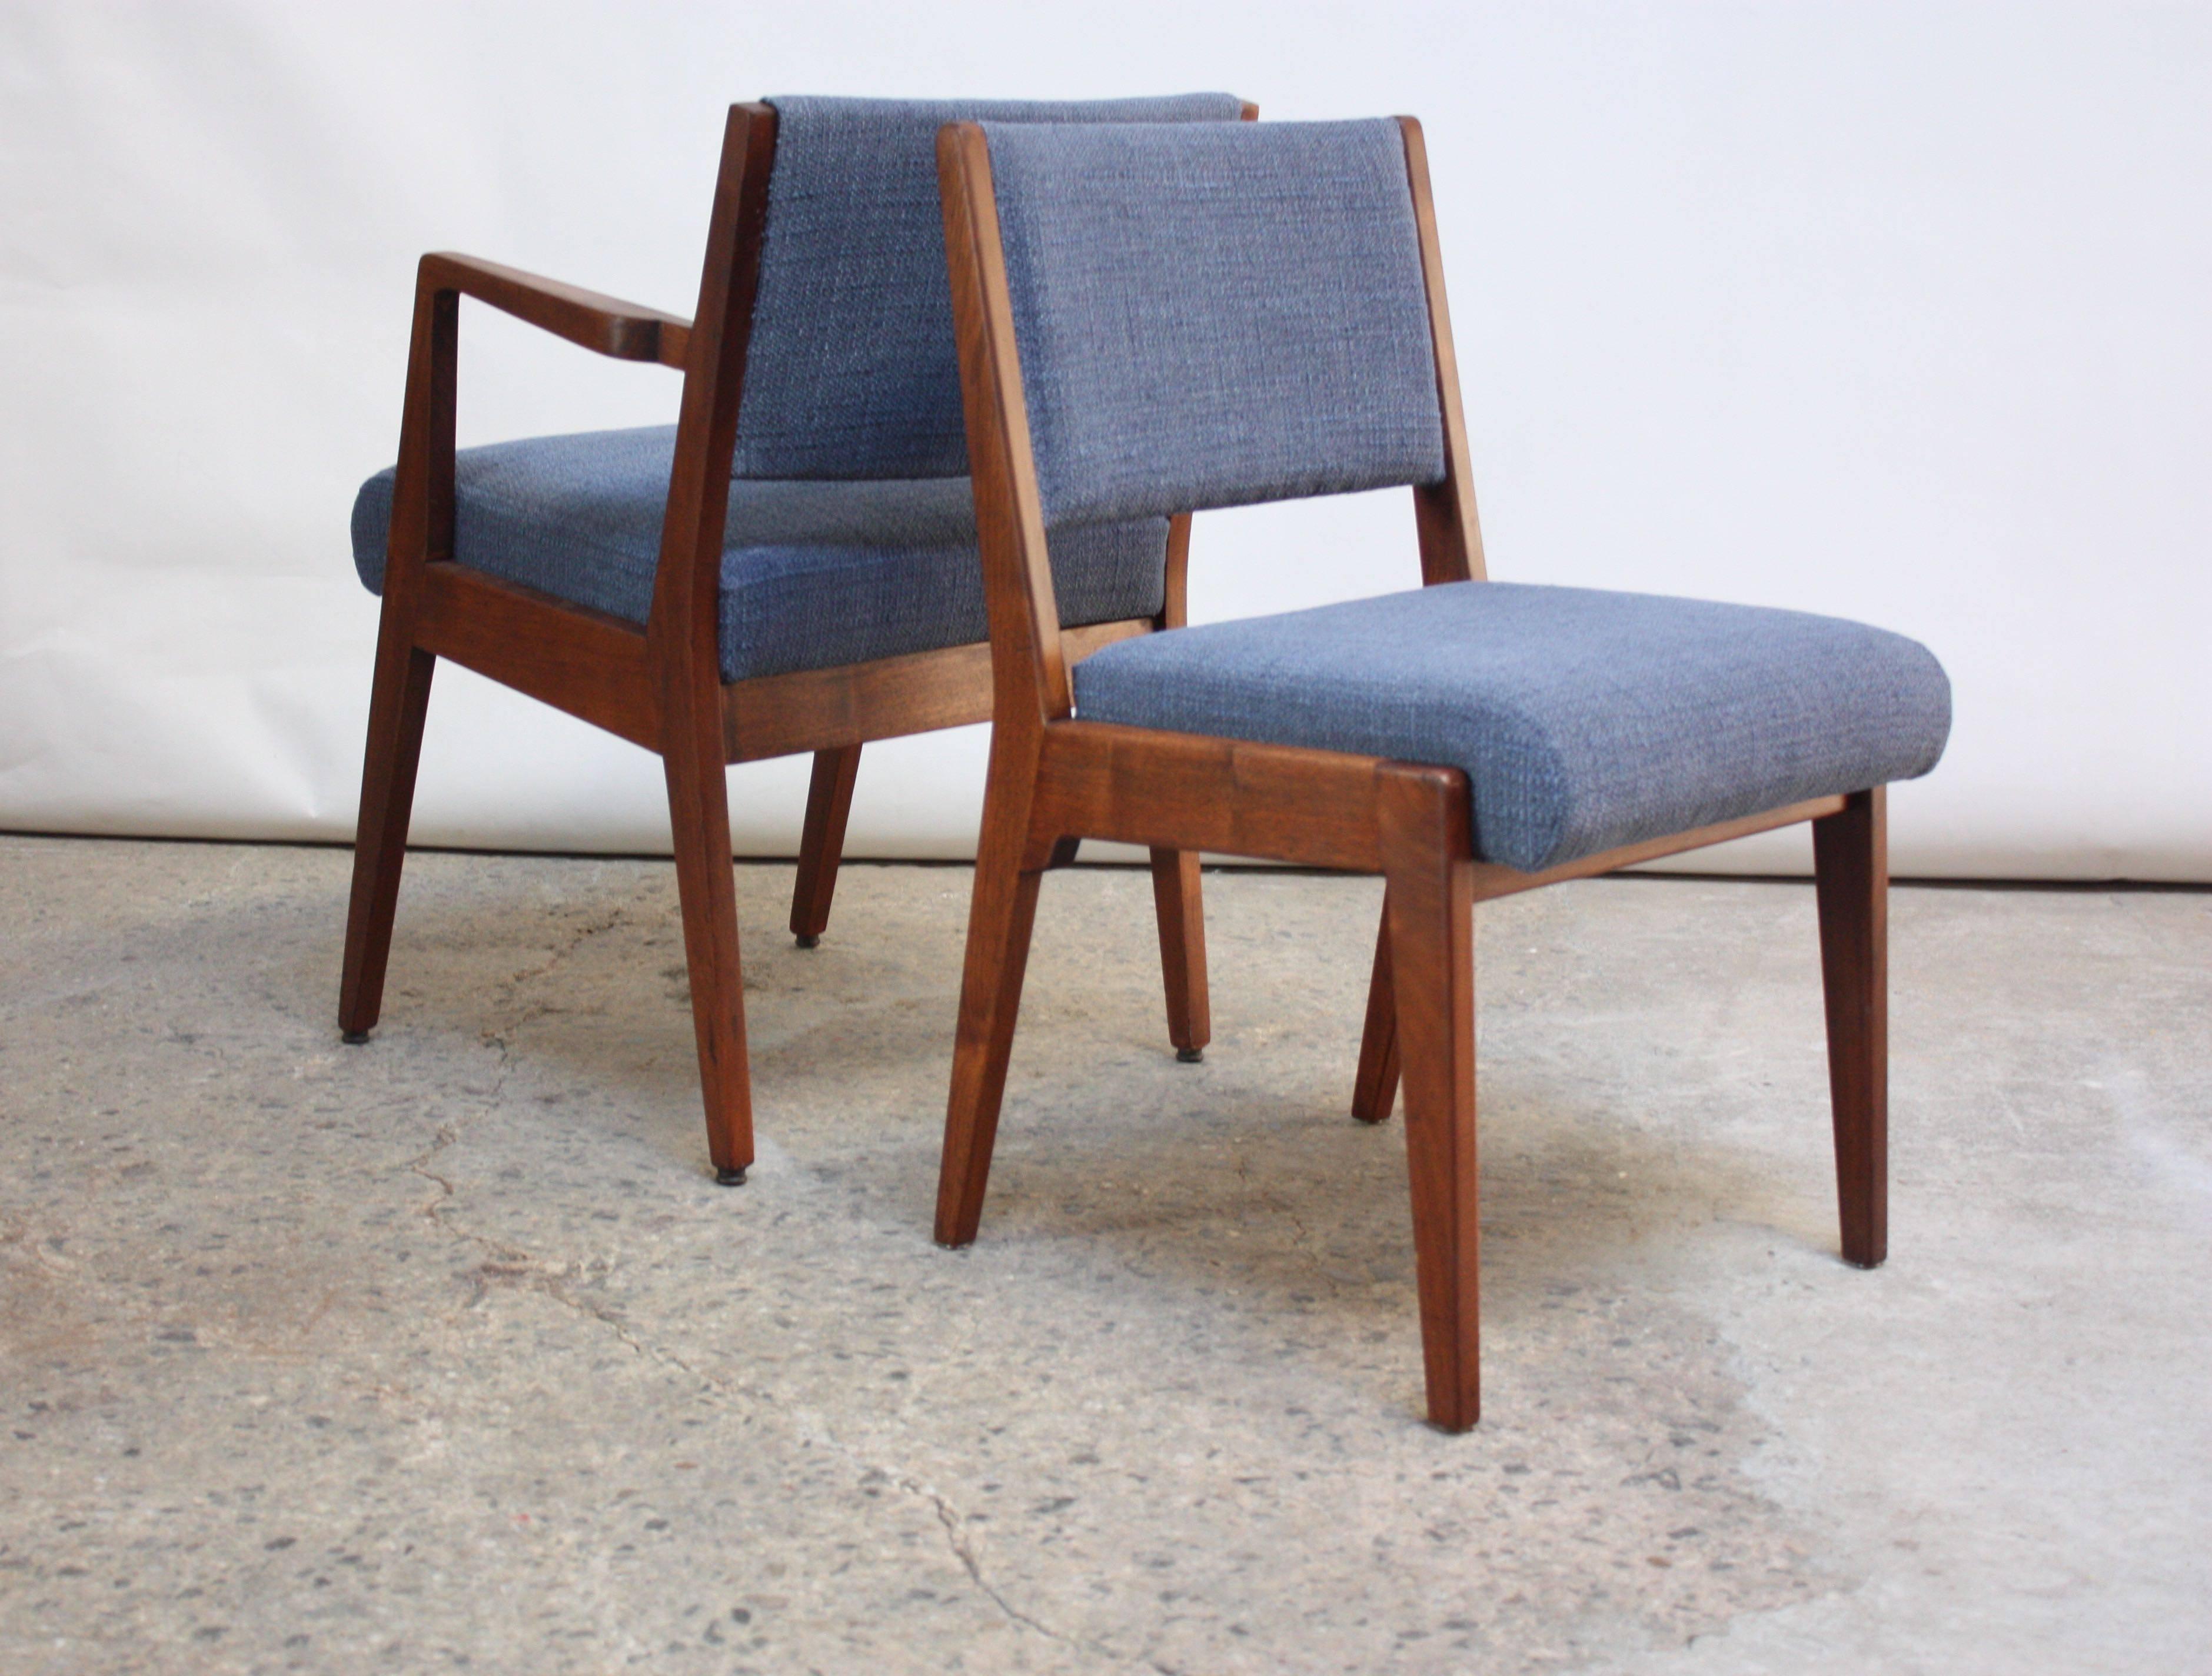 This set of early Jens Risom dining chairs, designed for his eponymous manufacturing firm, includes four side chairs and two captain's chairs. The sculptural walnut frames boast elegant lines and a rich walnut tone. 
The tweed upholstery is new, as